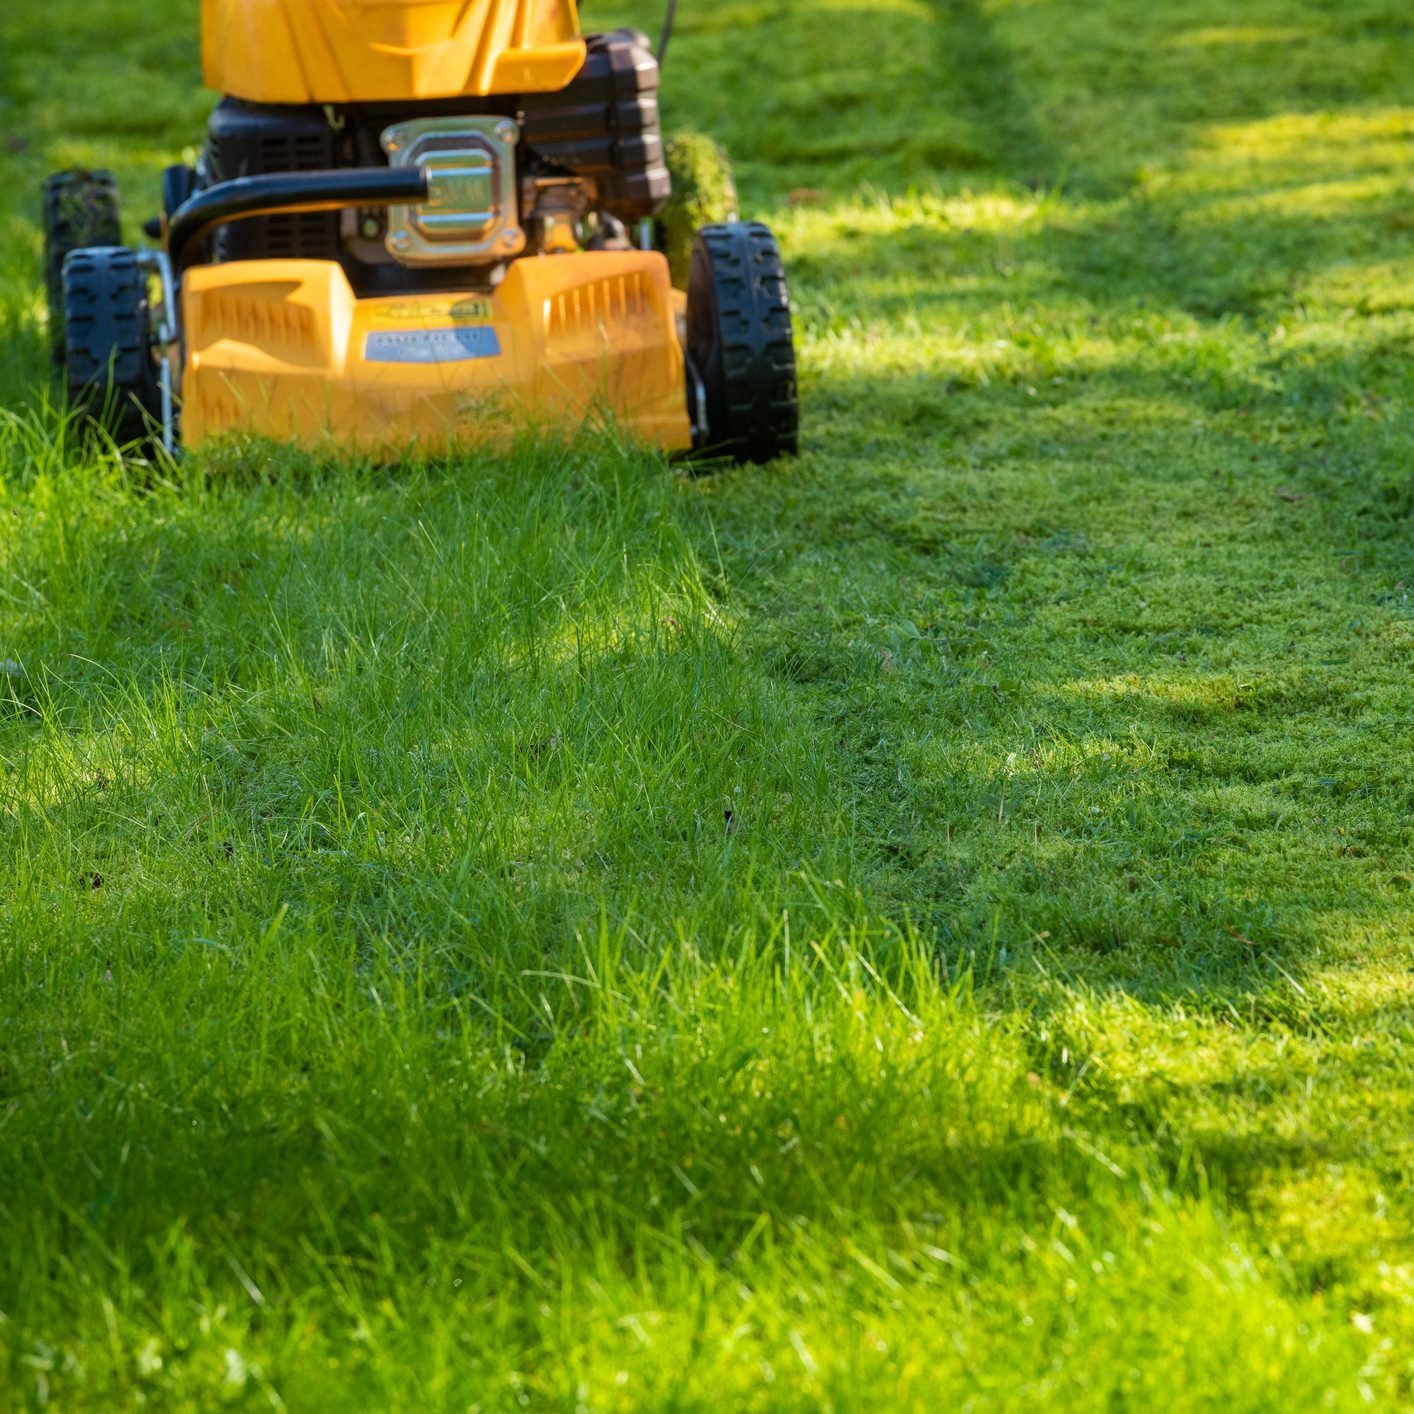 Top 10 Lawn Mower Safety Tips